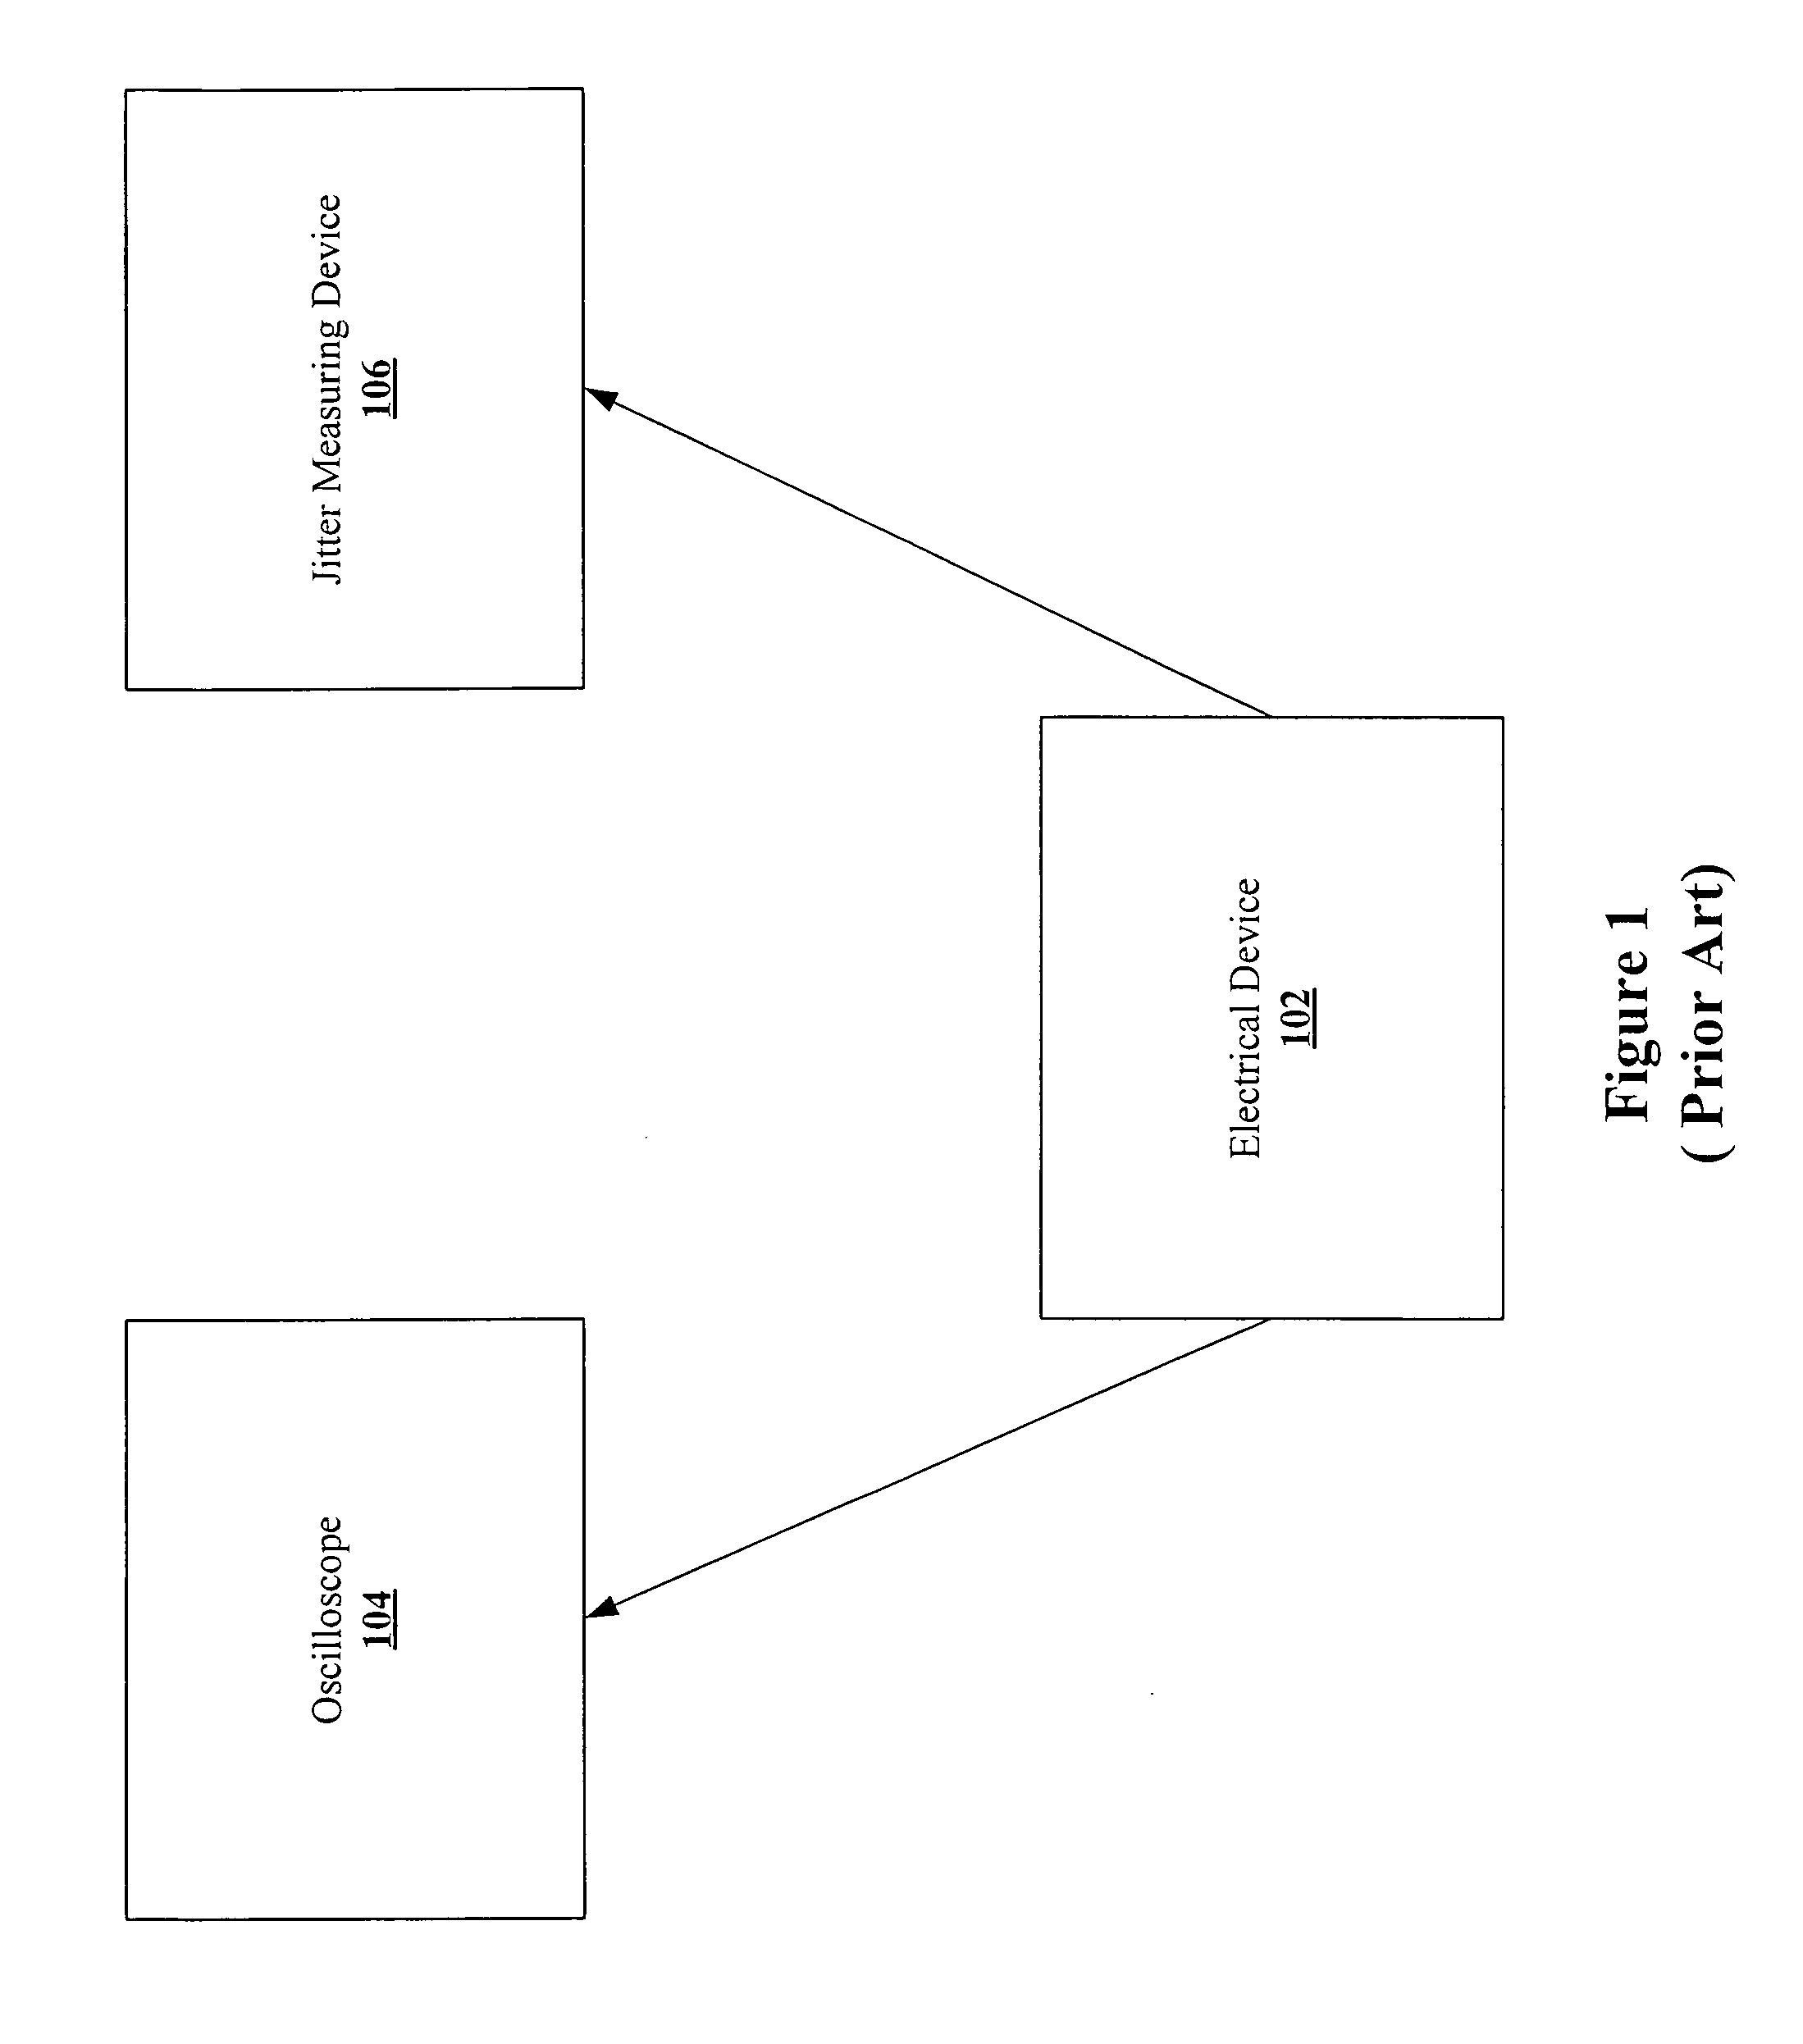 Simultaneous display of eye diagram and jitter profile during device characterization